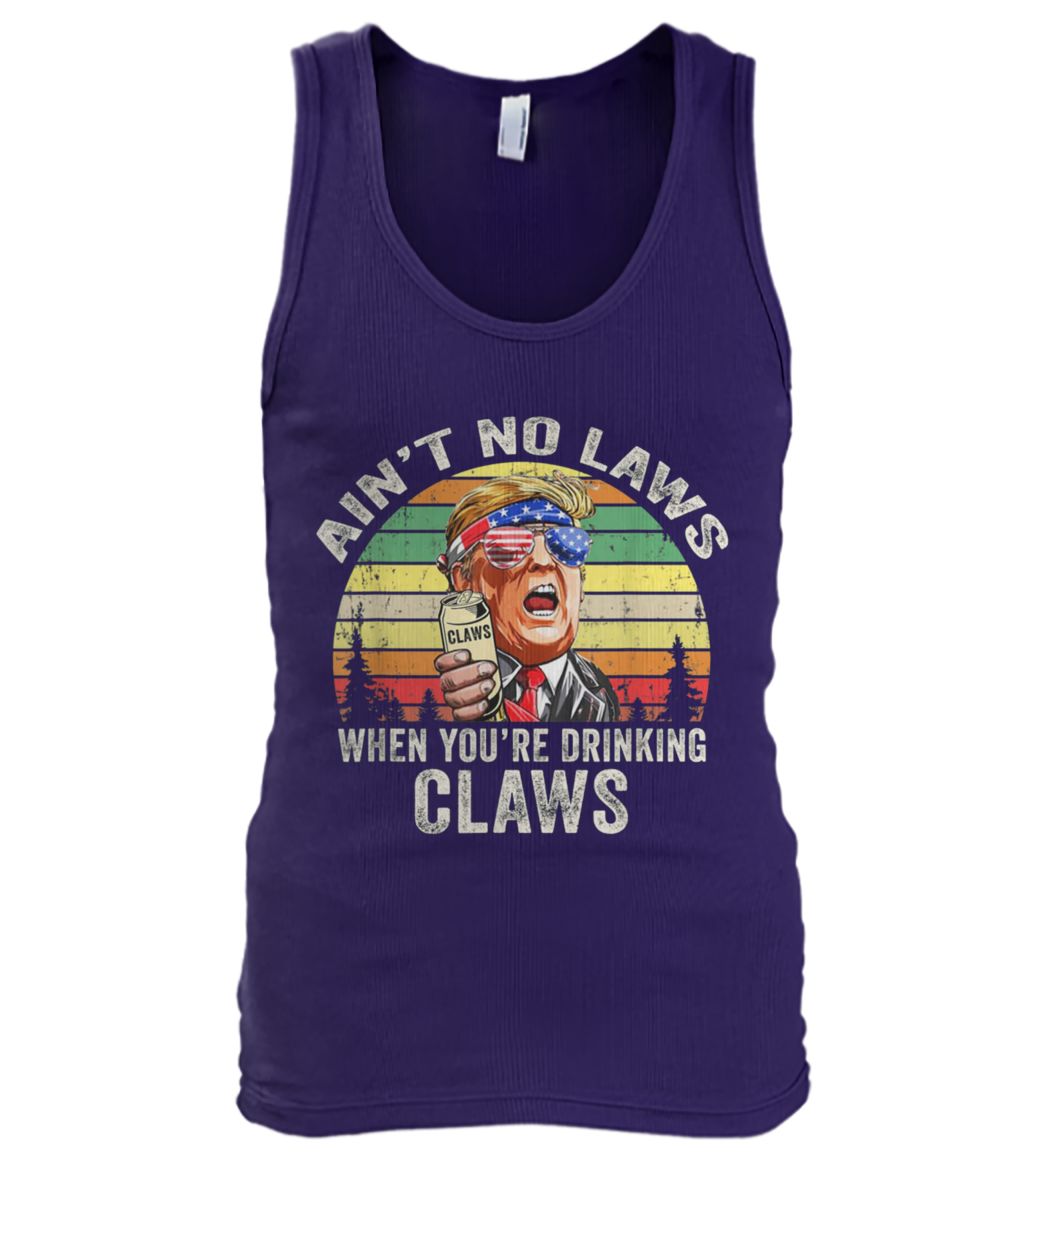 Vintage ain't no laws when youre drinking claws trump men's tank top